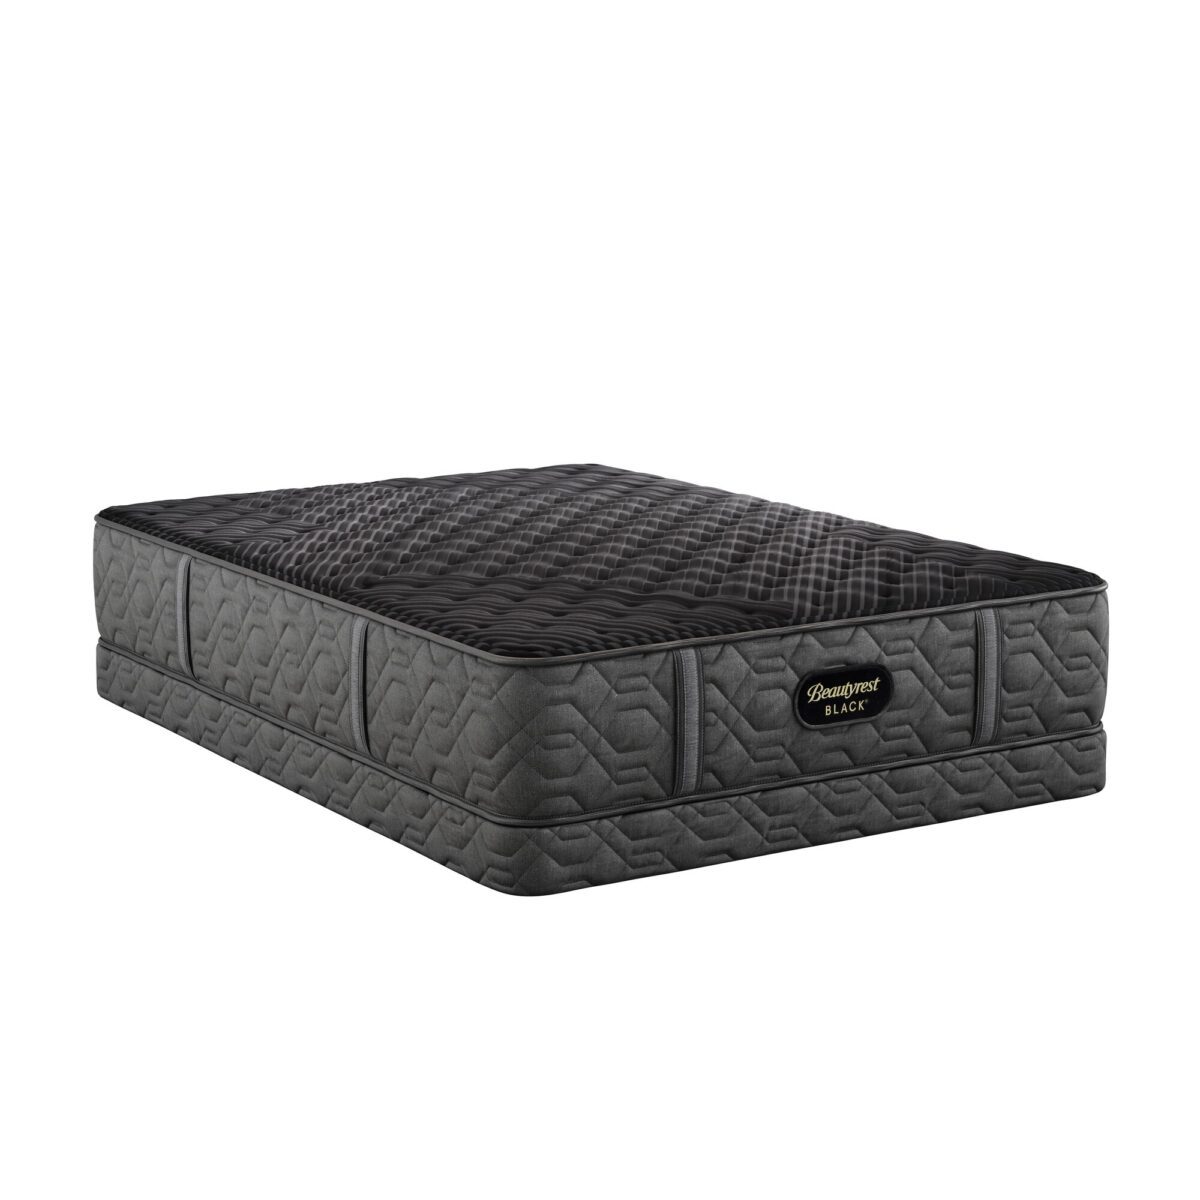 Beautyrest Black Series One Extra Firm Mattress Silo Angle Low Profile